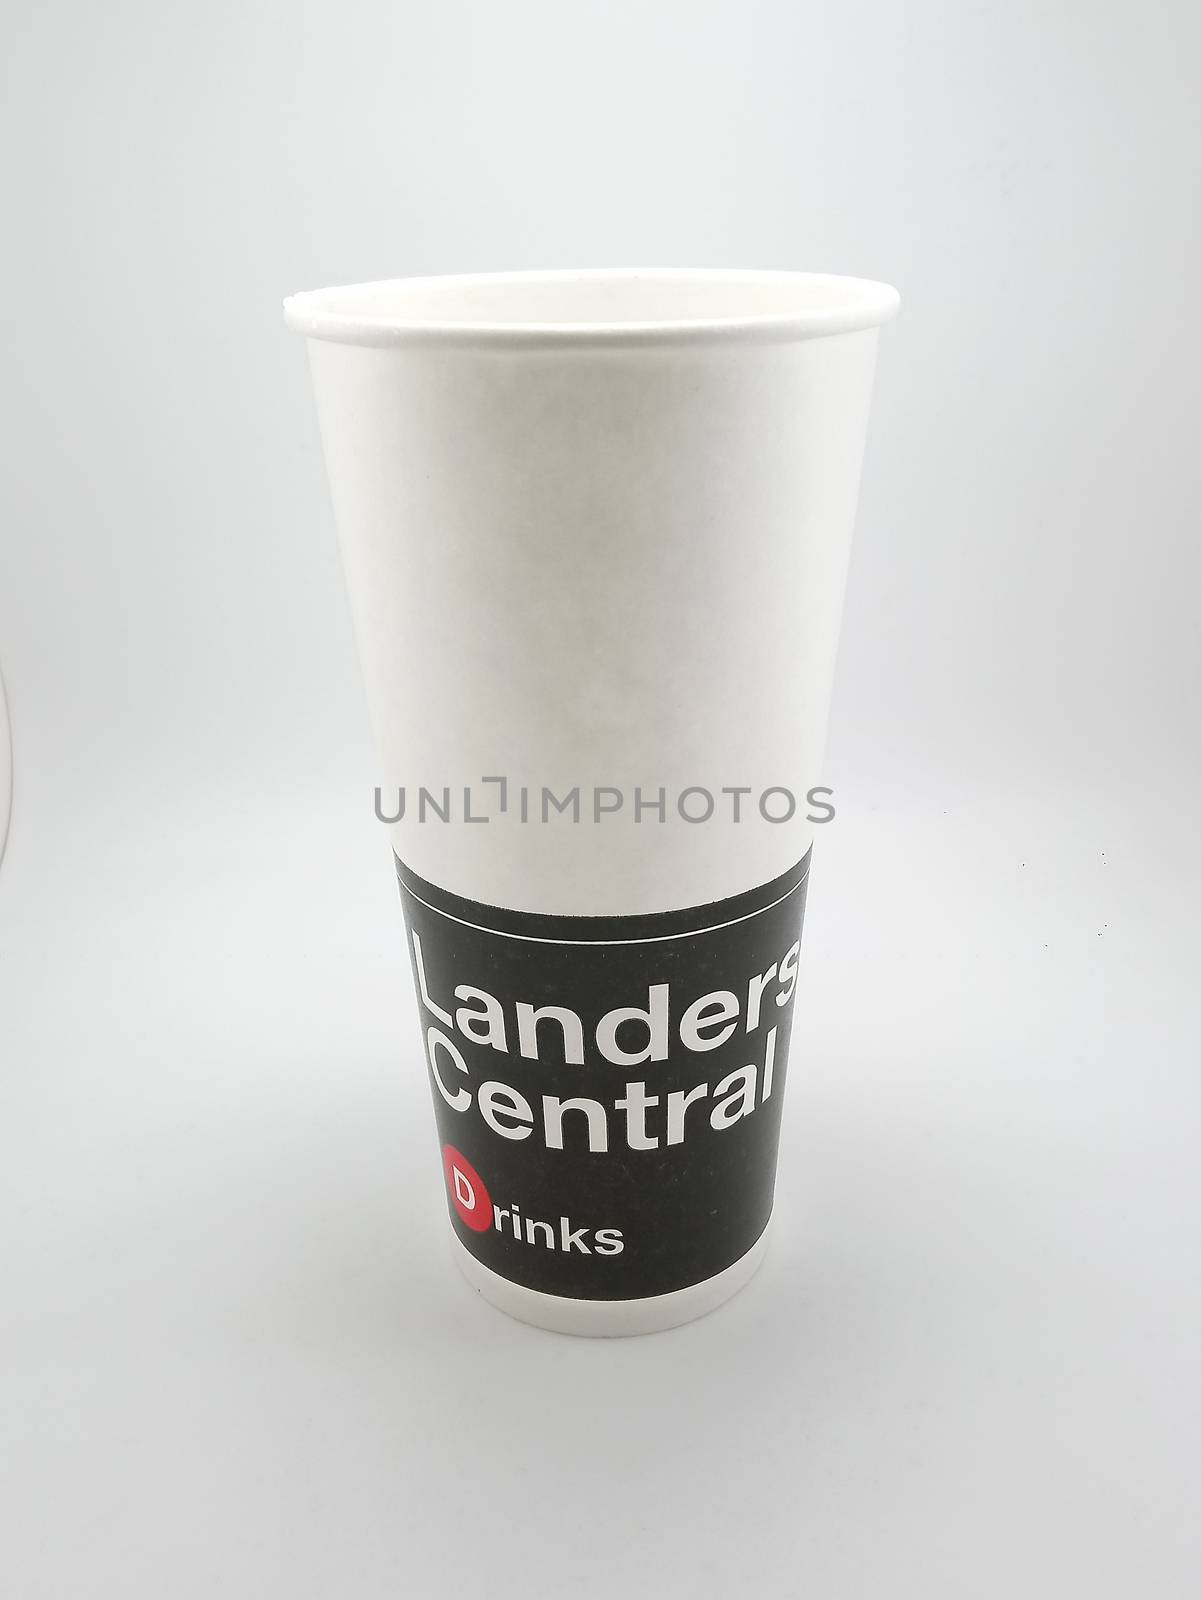 Landers central and coca cola drinking cup in Manila, Philippine by imwaltersy